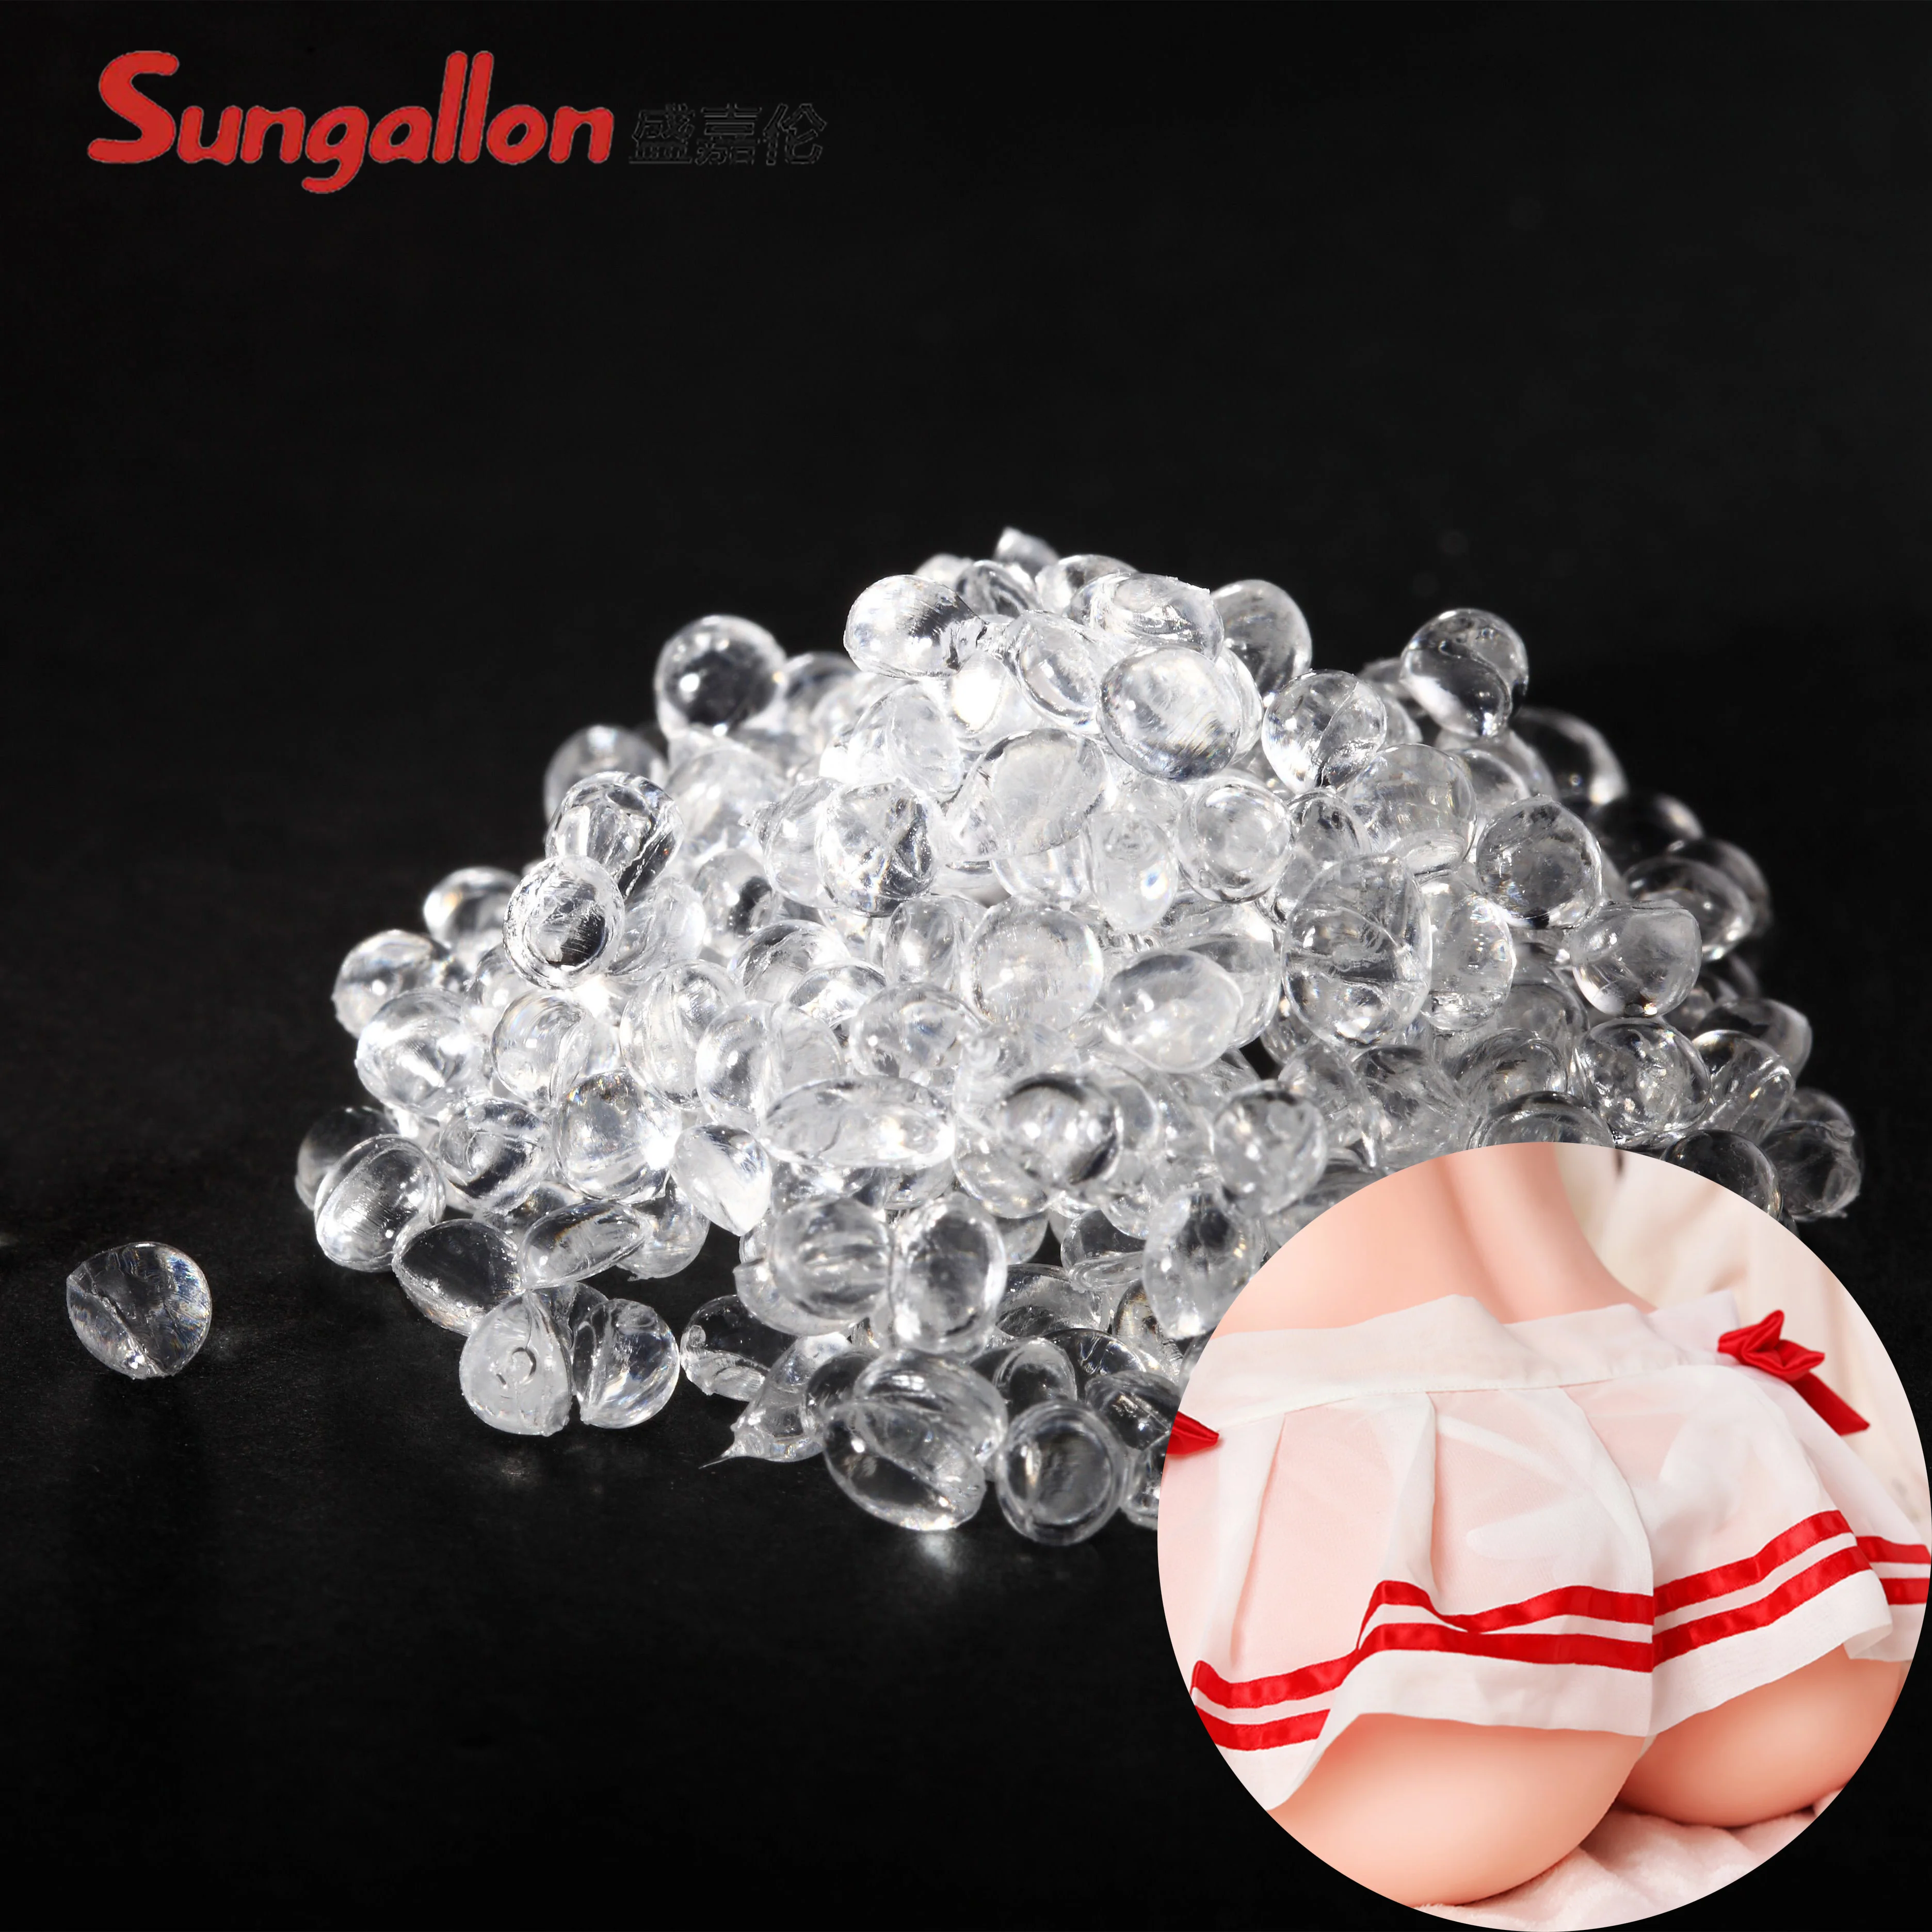 Adult Soft Sexy Hot Toy Raw Material Tpe Tpr Granules from Sungallon Skin-like Touch